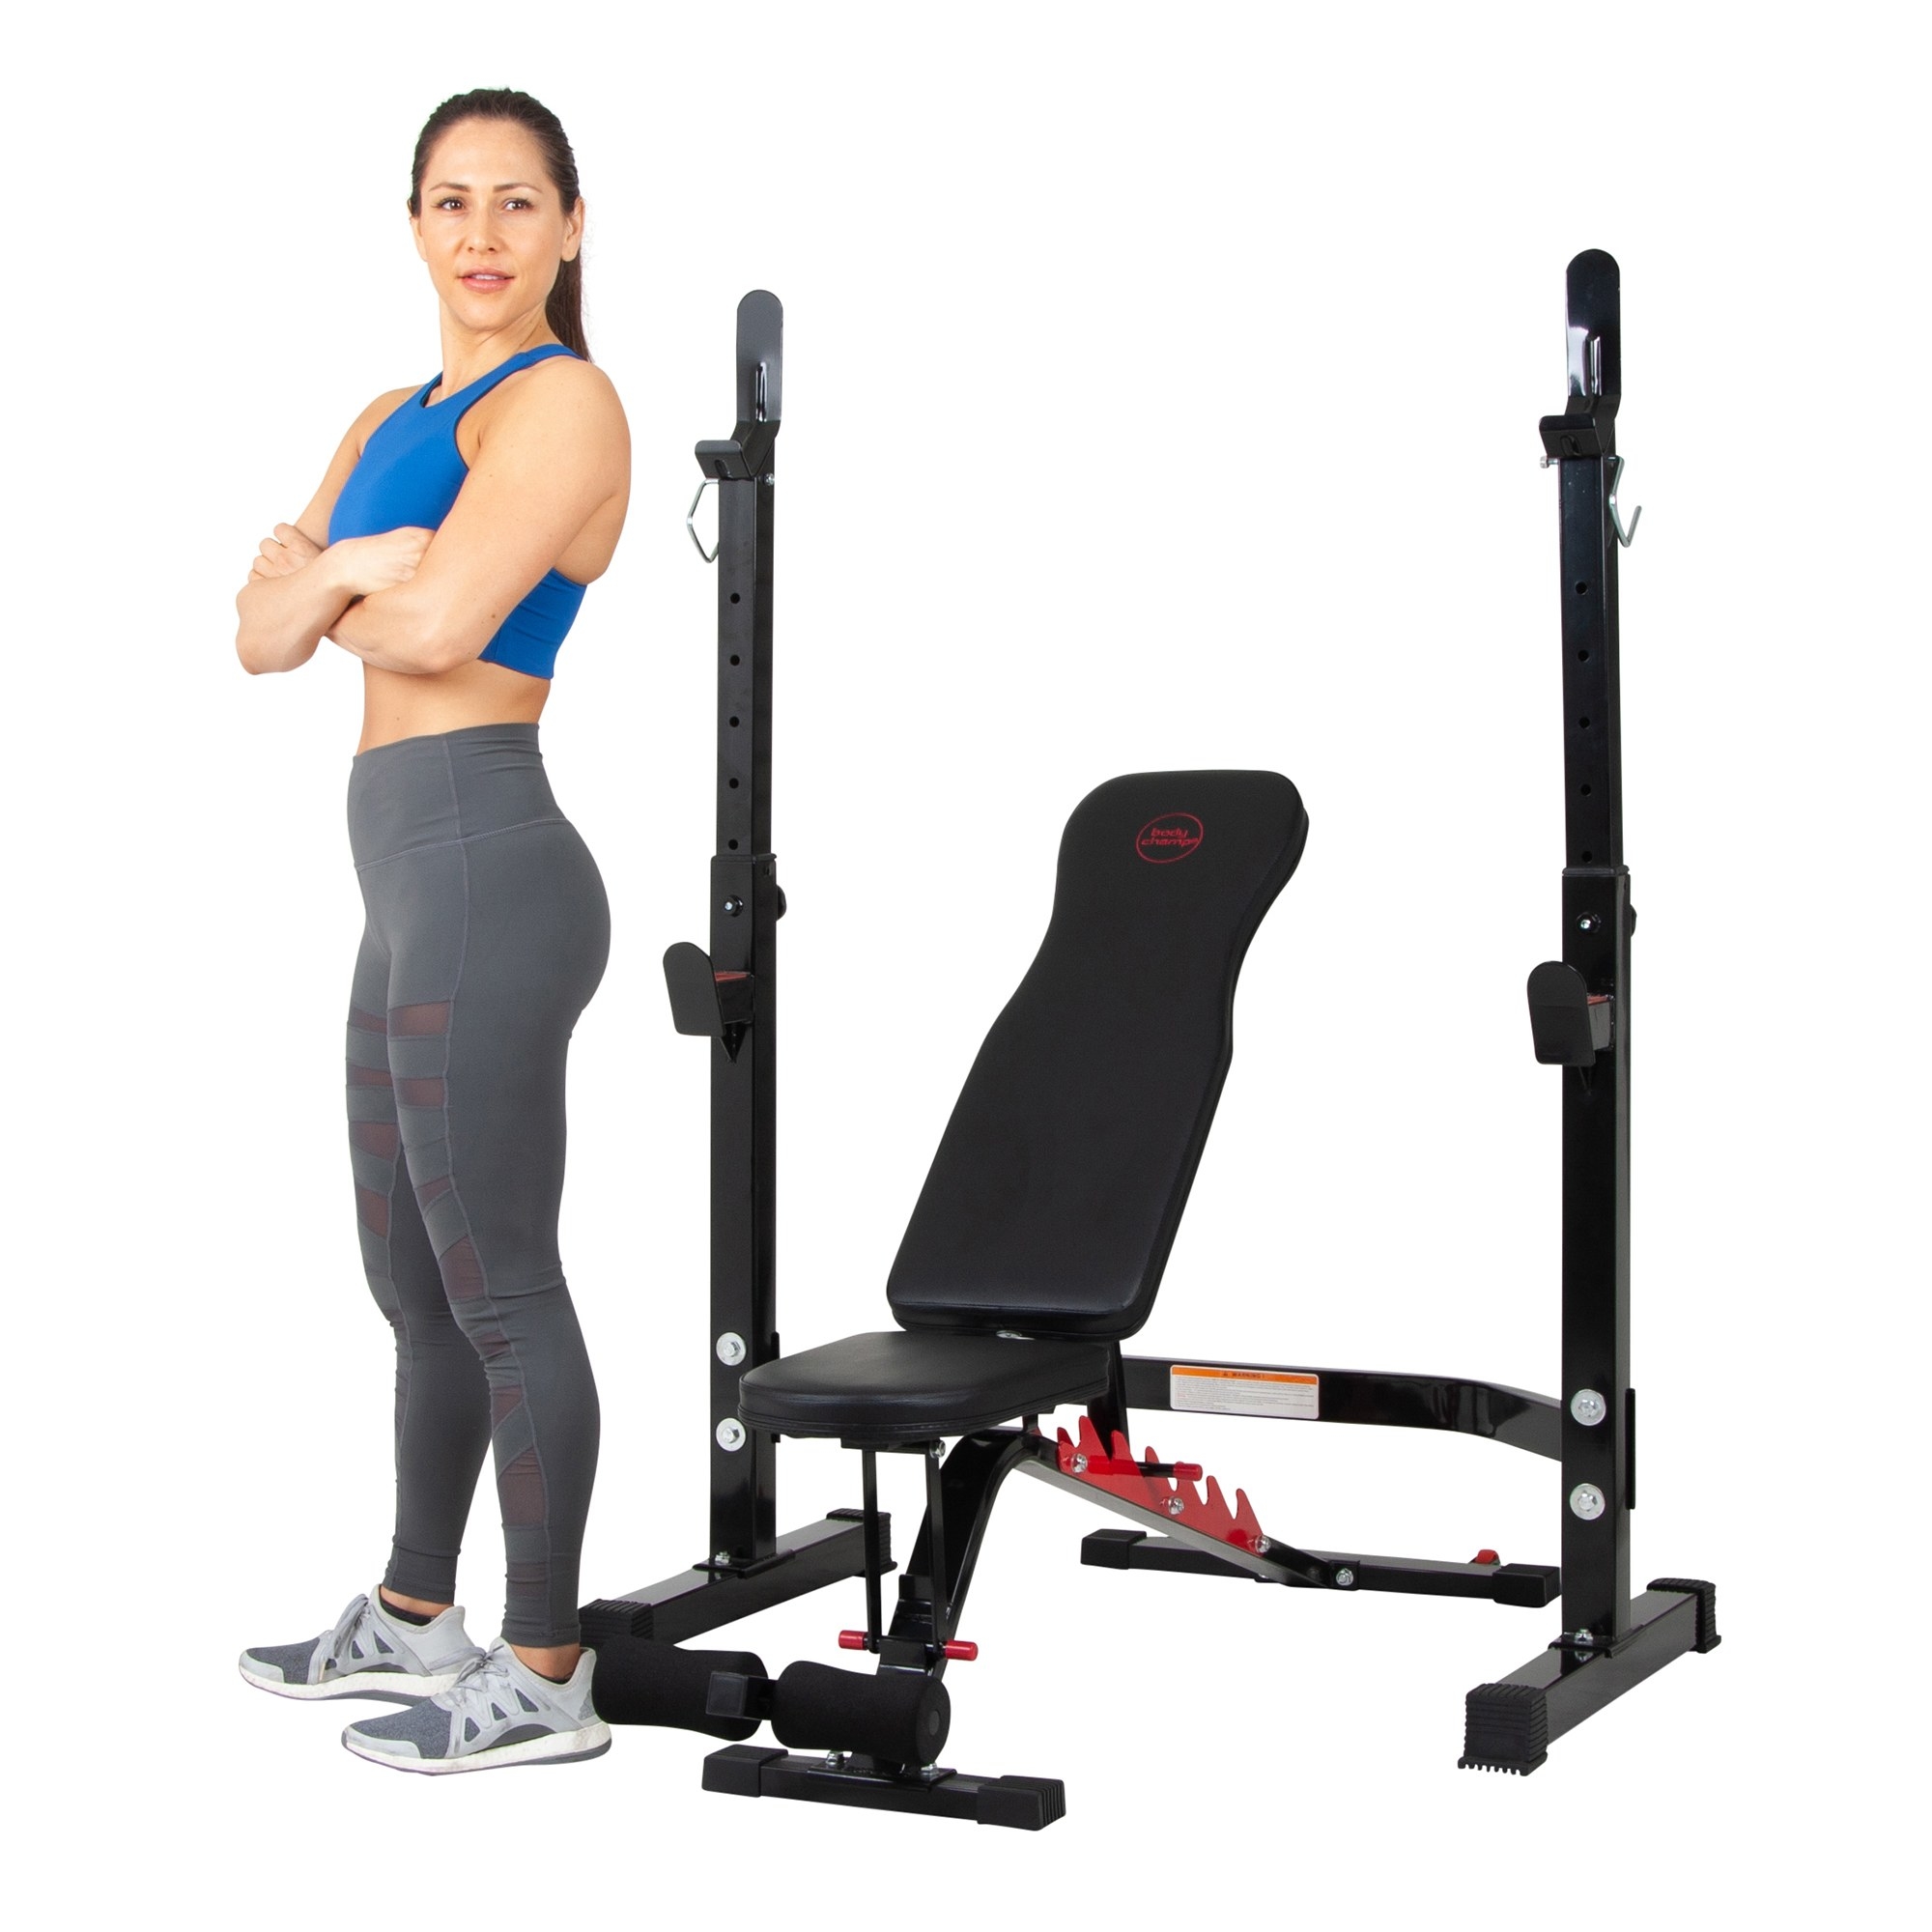 There is an adult standing next to the black and red bench and squat rack